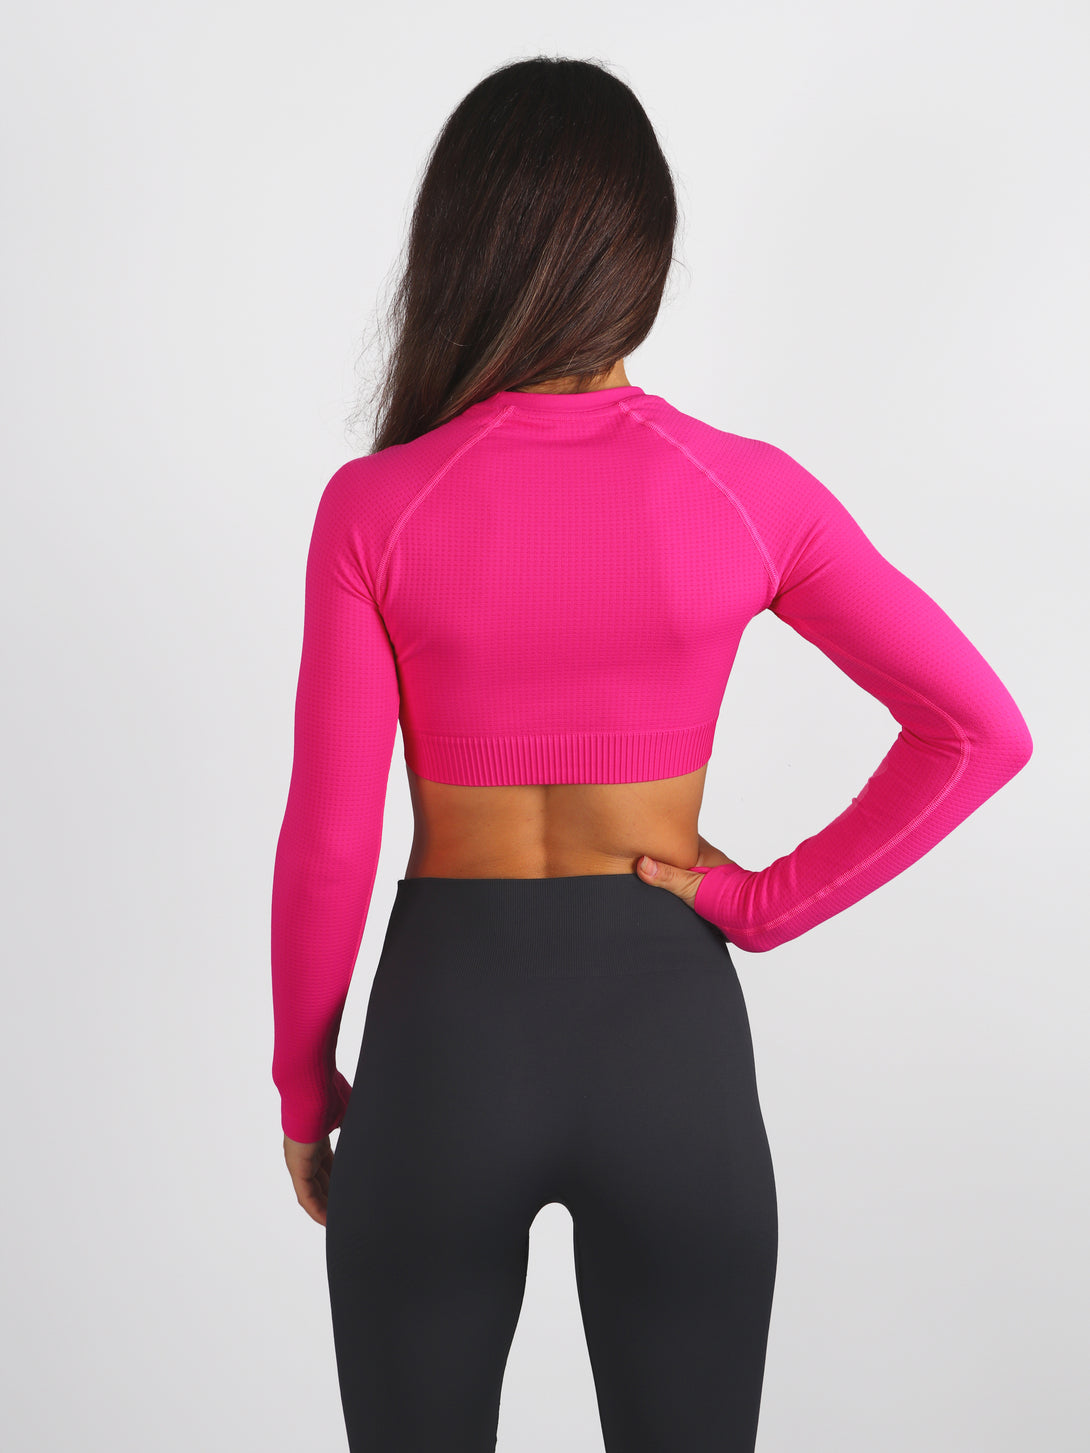 A Woman Wearing Beetroot Purple Color The Main Long Sleeve Crop Top